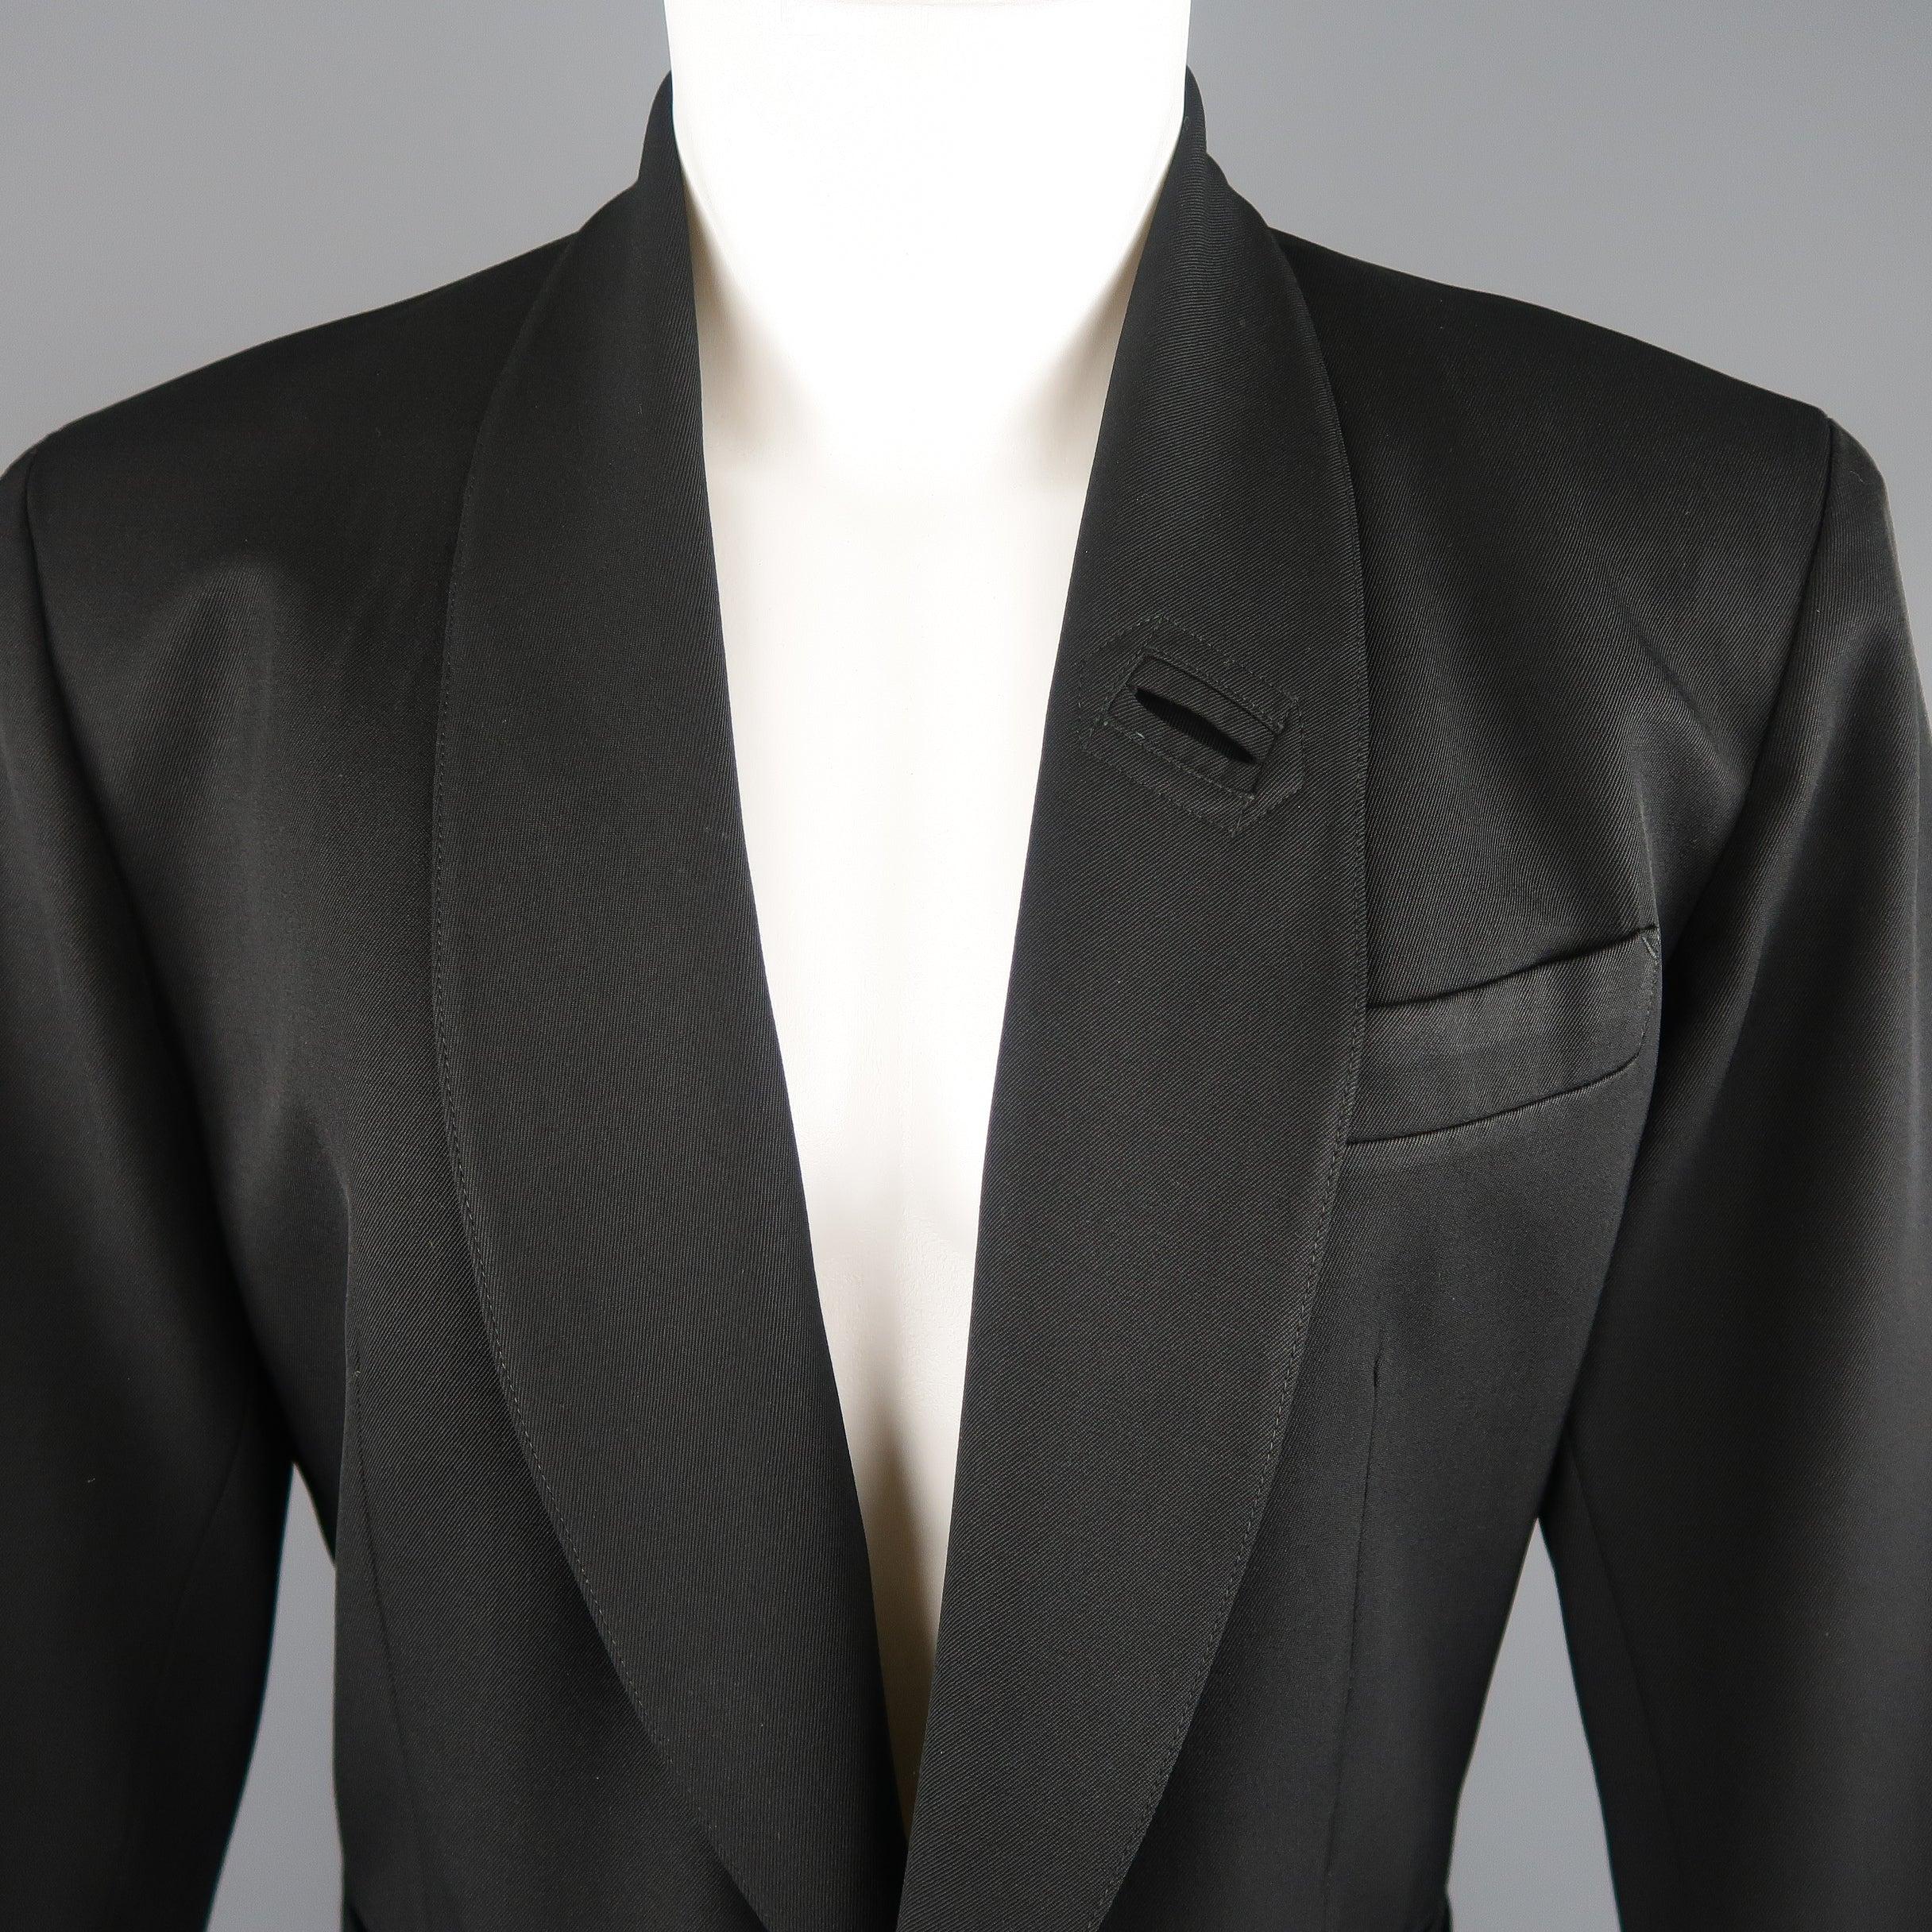 Vintage 1980's JEAN PAUL GAULTIER pour GIBO sport coat comes in black wool blend twill with a shawl collar, two button single breasted front, patch and slit pockets, and signature back tab. Circa 1985. Made in Italy.
 Excellent Pre-Owned Condition.
